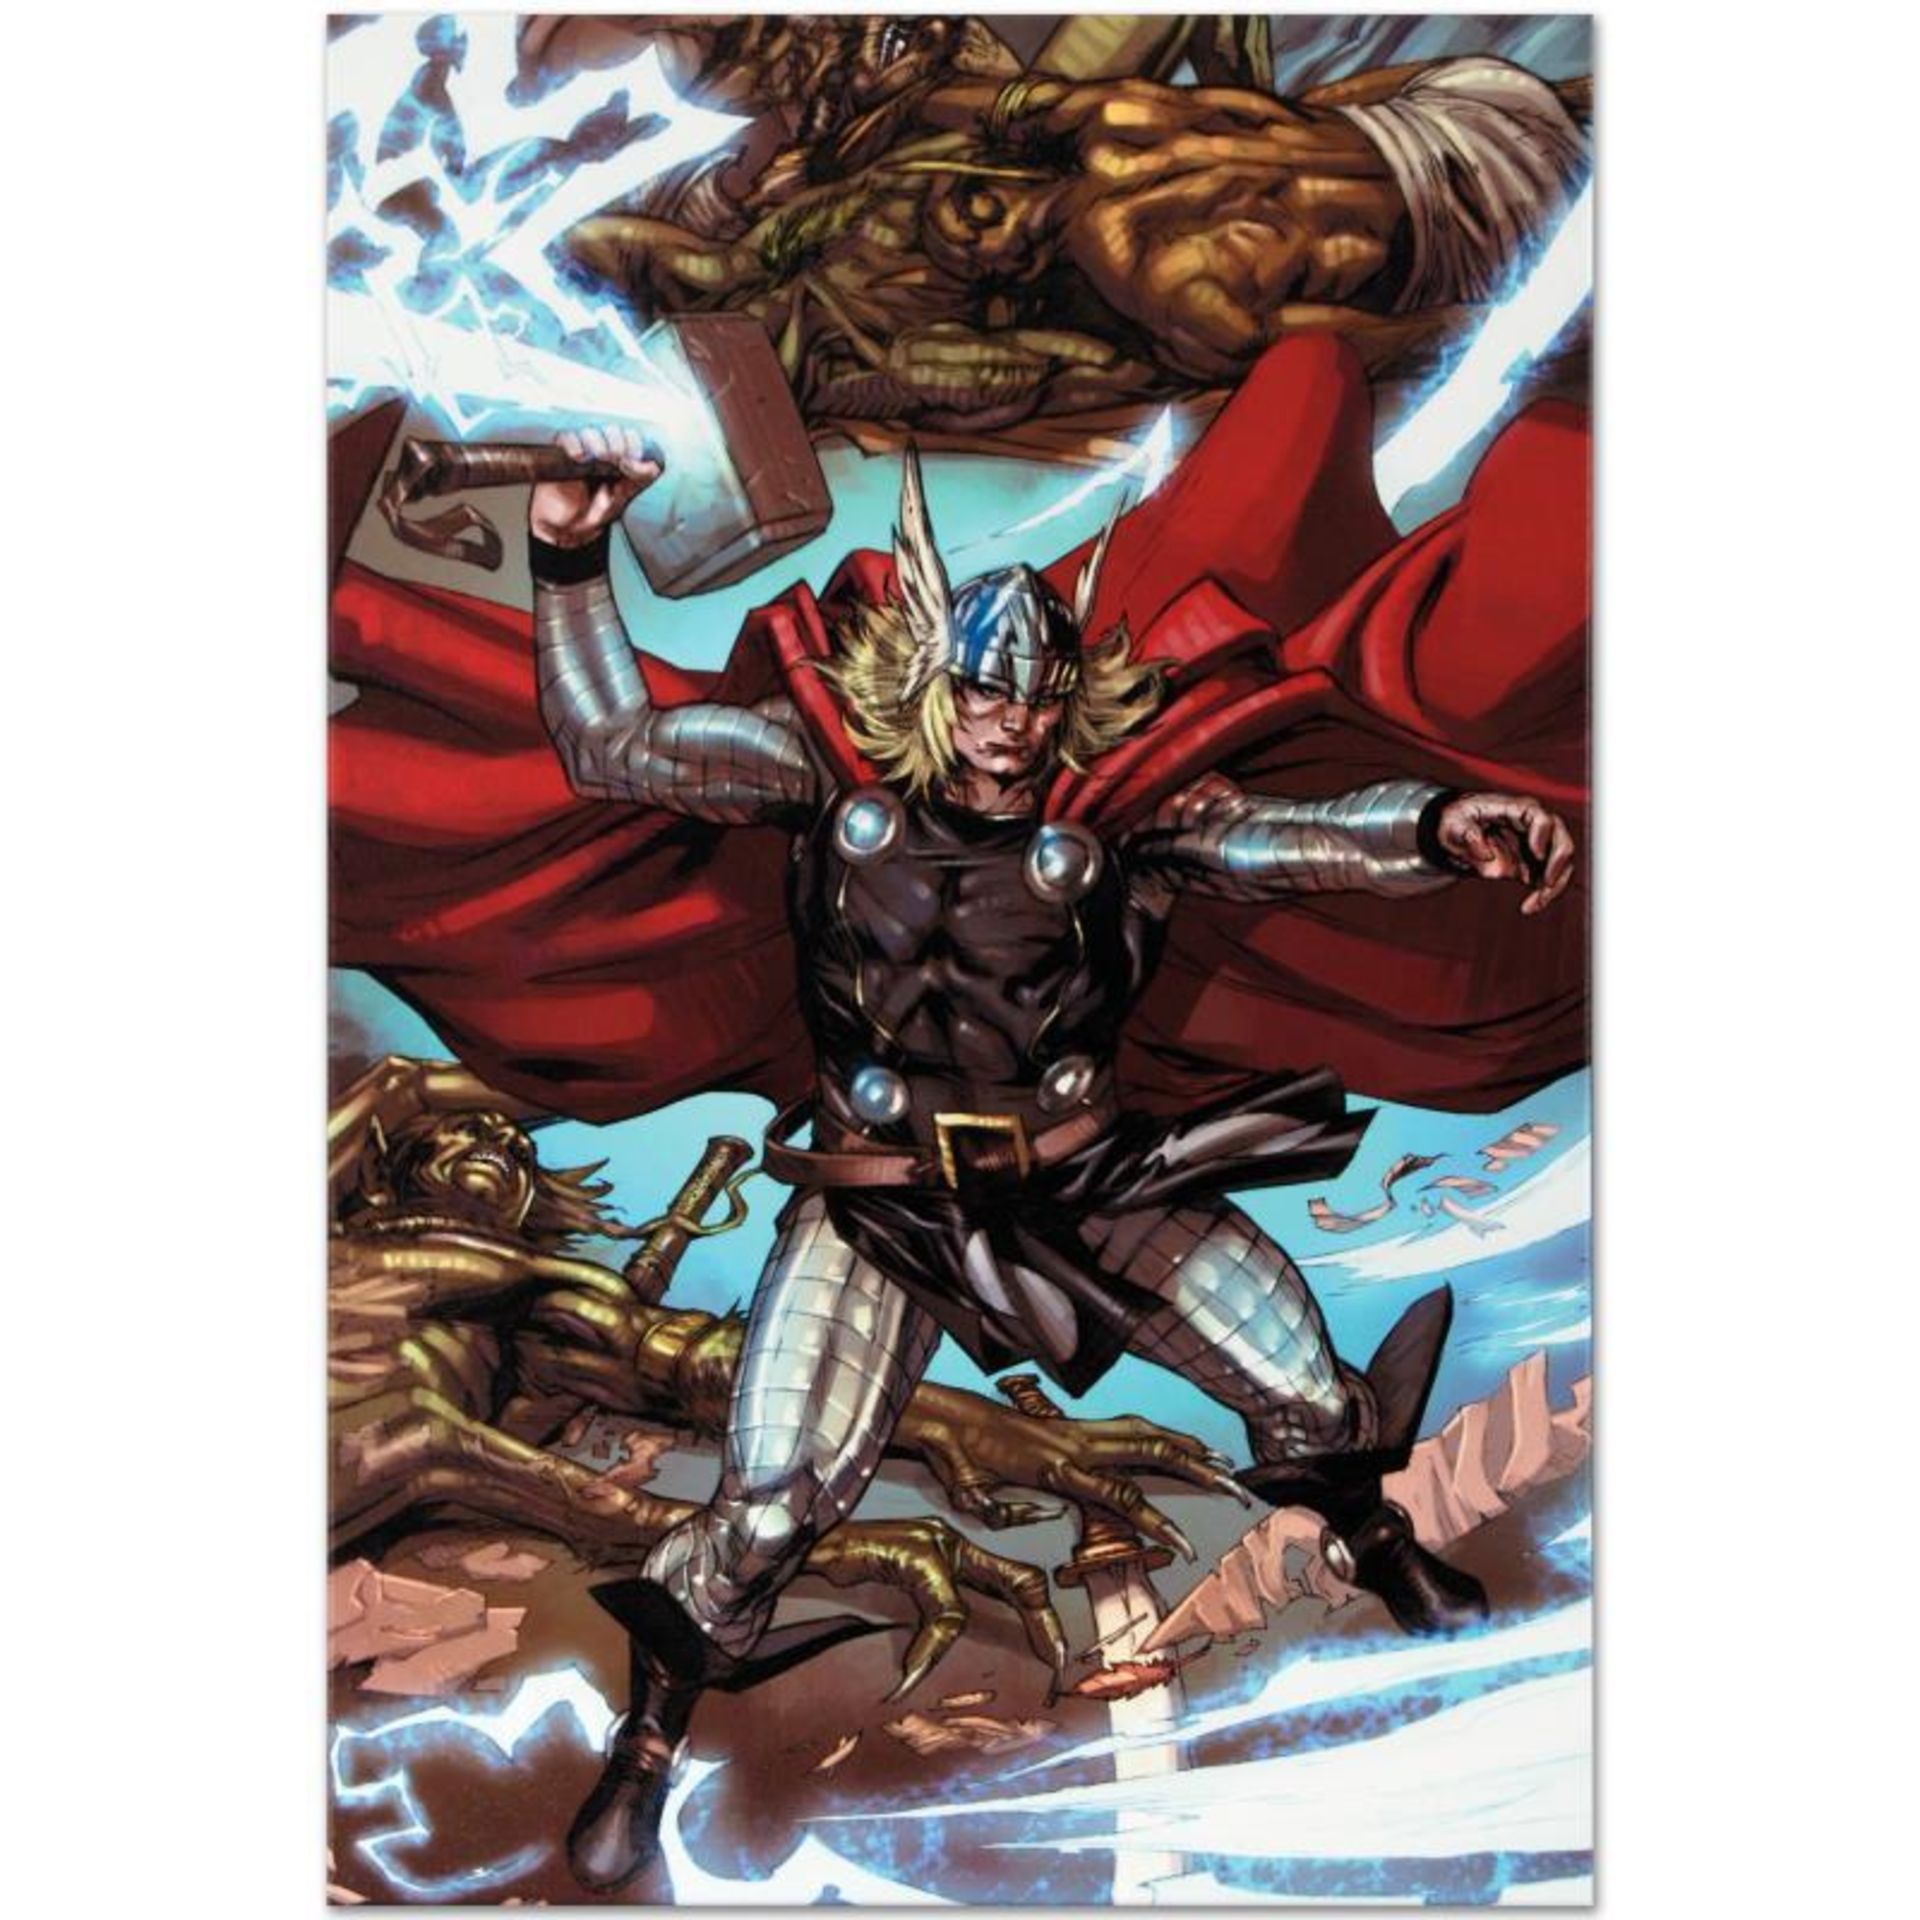 Marvel Comics "Thor: Heaven and Earth #3" Numbered Limited Edition Giclee on Can